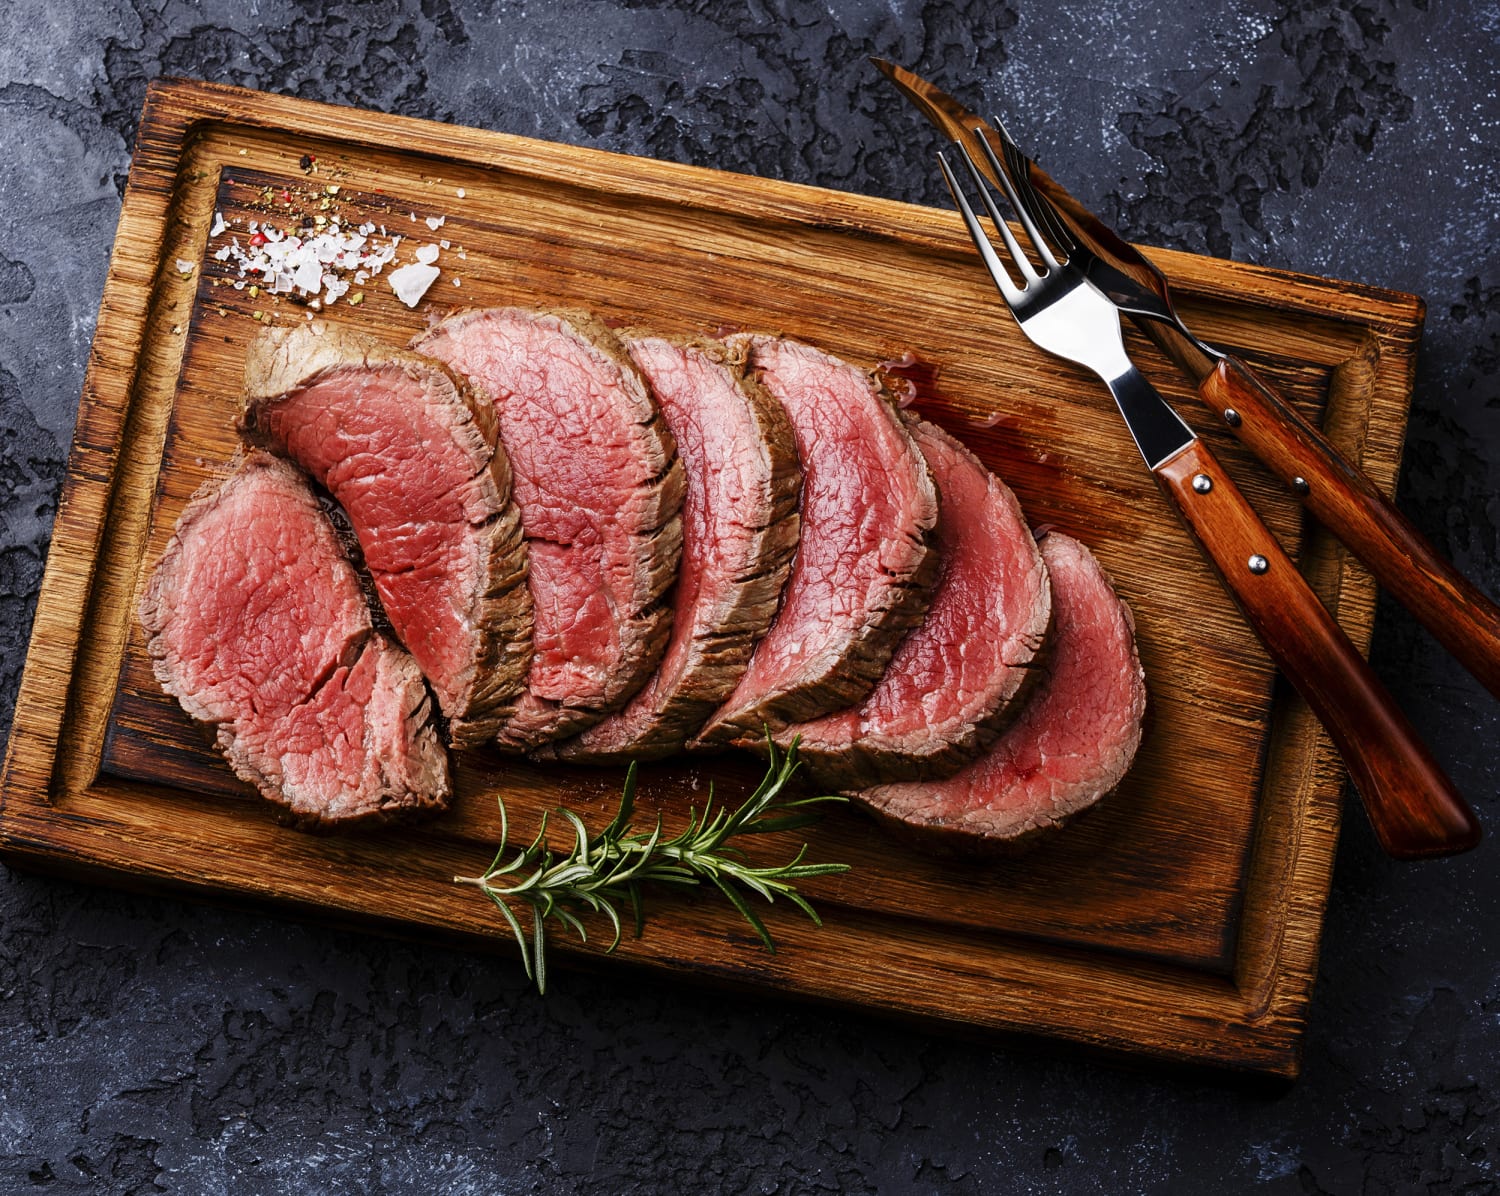 https://media-cldnry.s-nbcnews.com/image/upload/newscms/2020_04/1531869/cooking-steak-rare-today-inline-200124.jpg